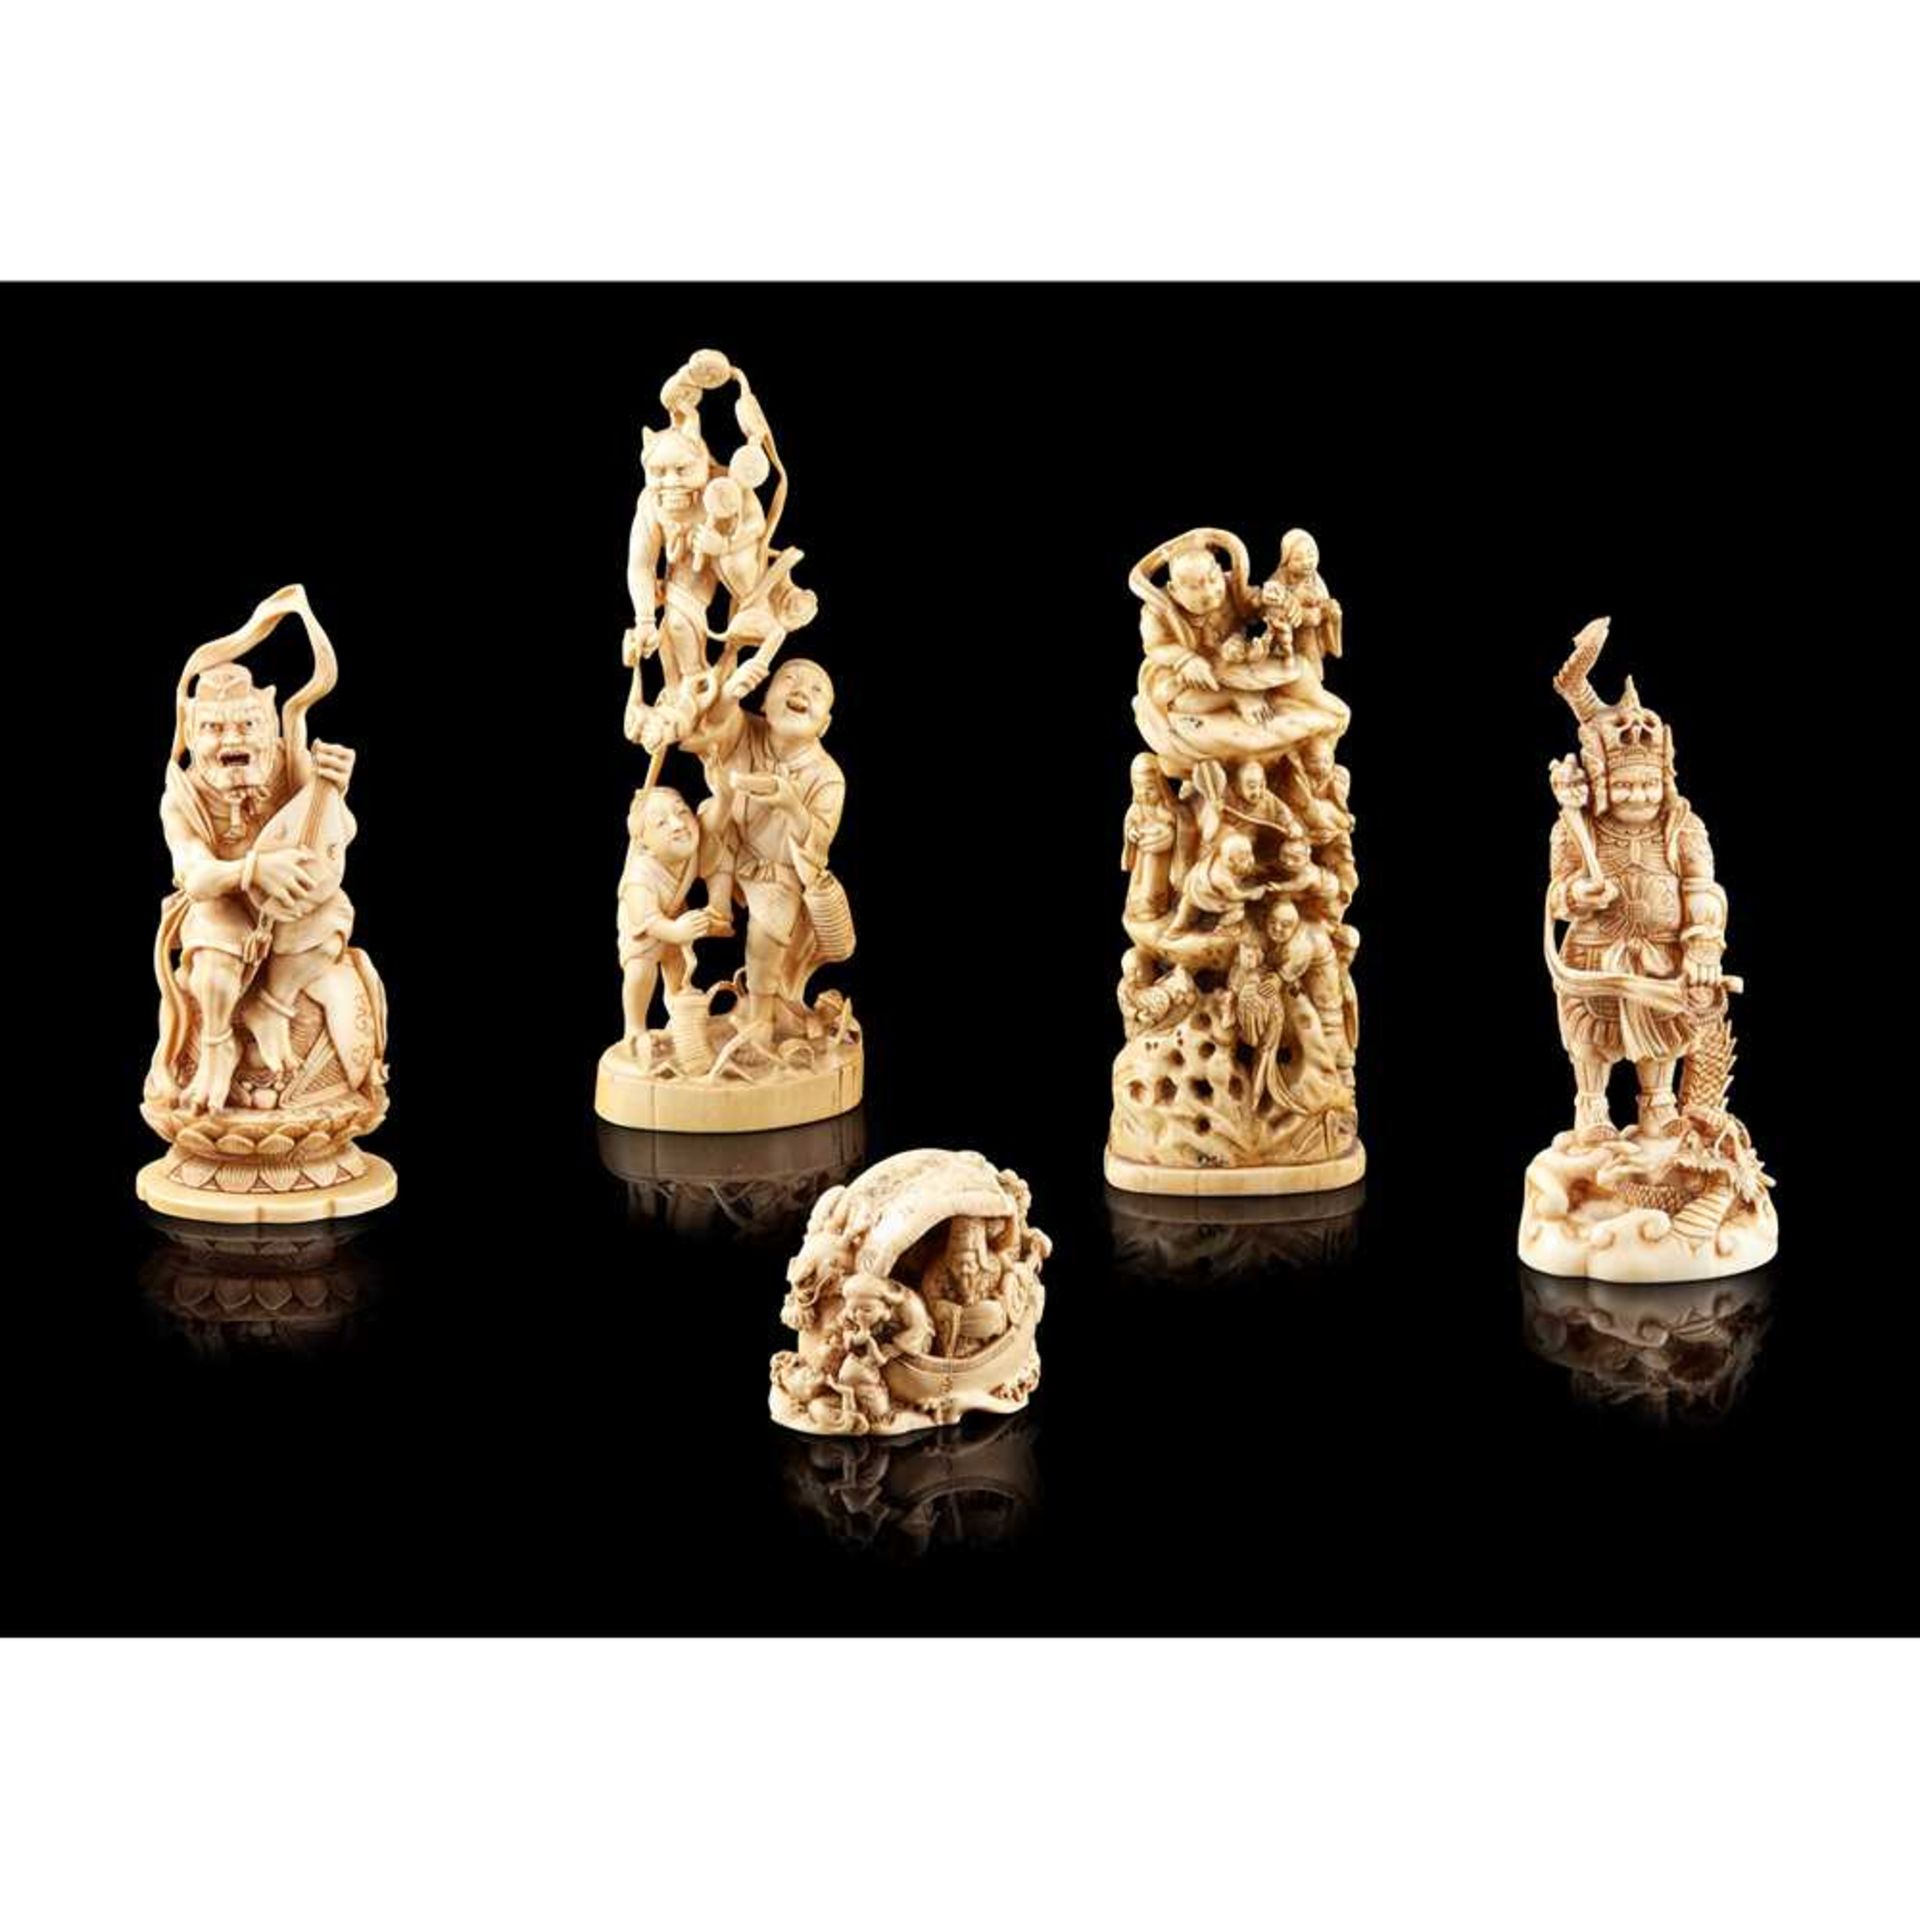 GROUP OF FIVE JAPANESE IVORY CARVINGS MEIJI PERIOD